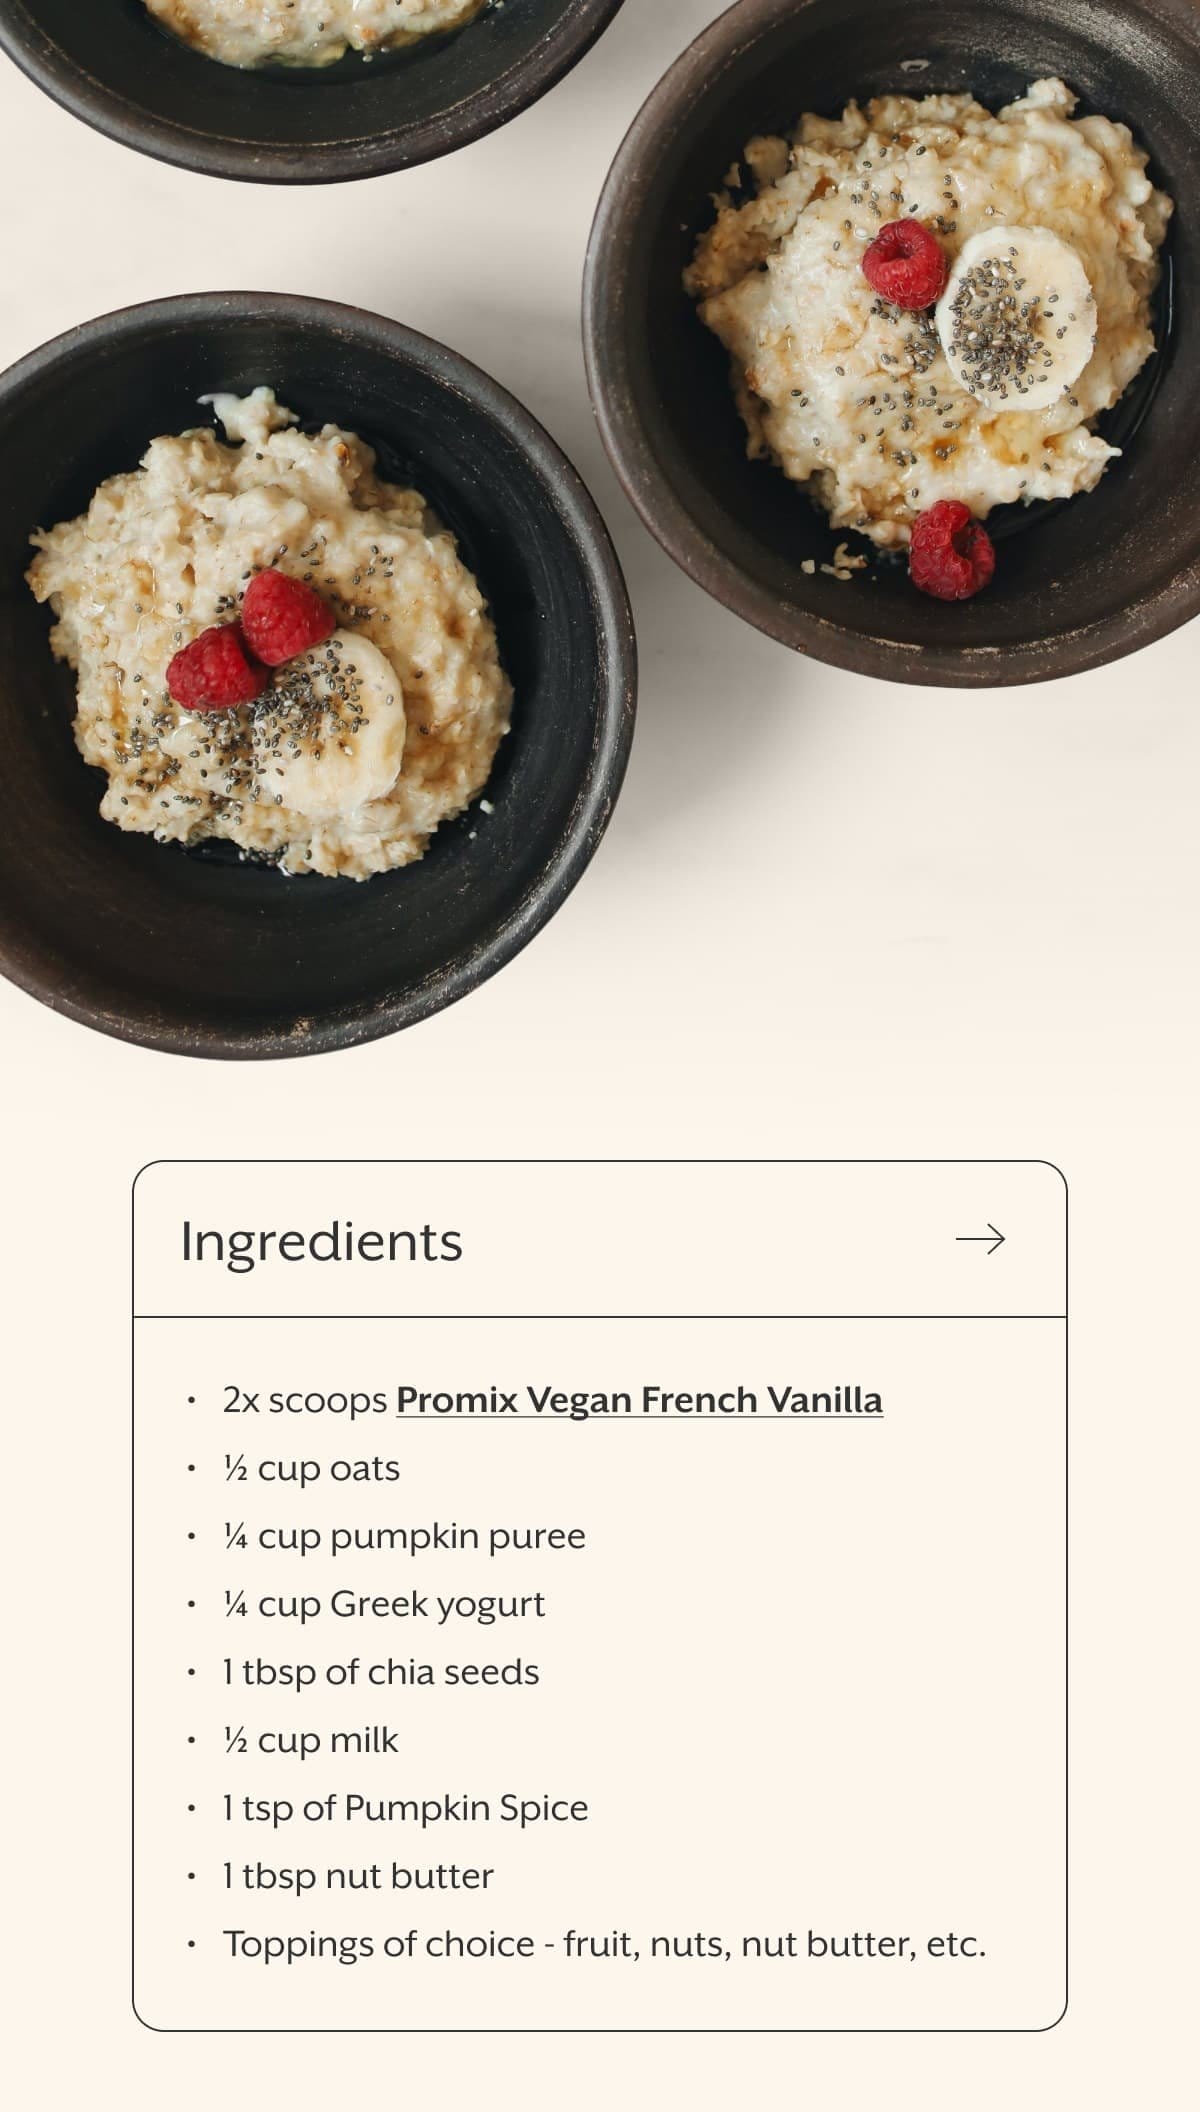 Ingredients 2x scoops Promix Vegan French Vanilla ½ cup oats ¼ cup pumpkin puree ¼ cup Greek yogurt 1 tbsp of chia seeds ½ cup milk 1 tsp of Pumpkin Spice 1 tbsp nut butter Toppings of choice - fruit, nuts, nut butter, etc.